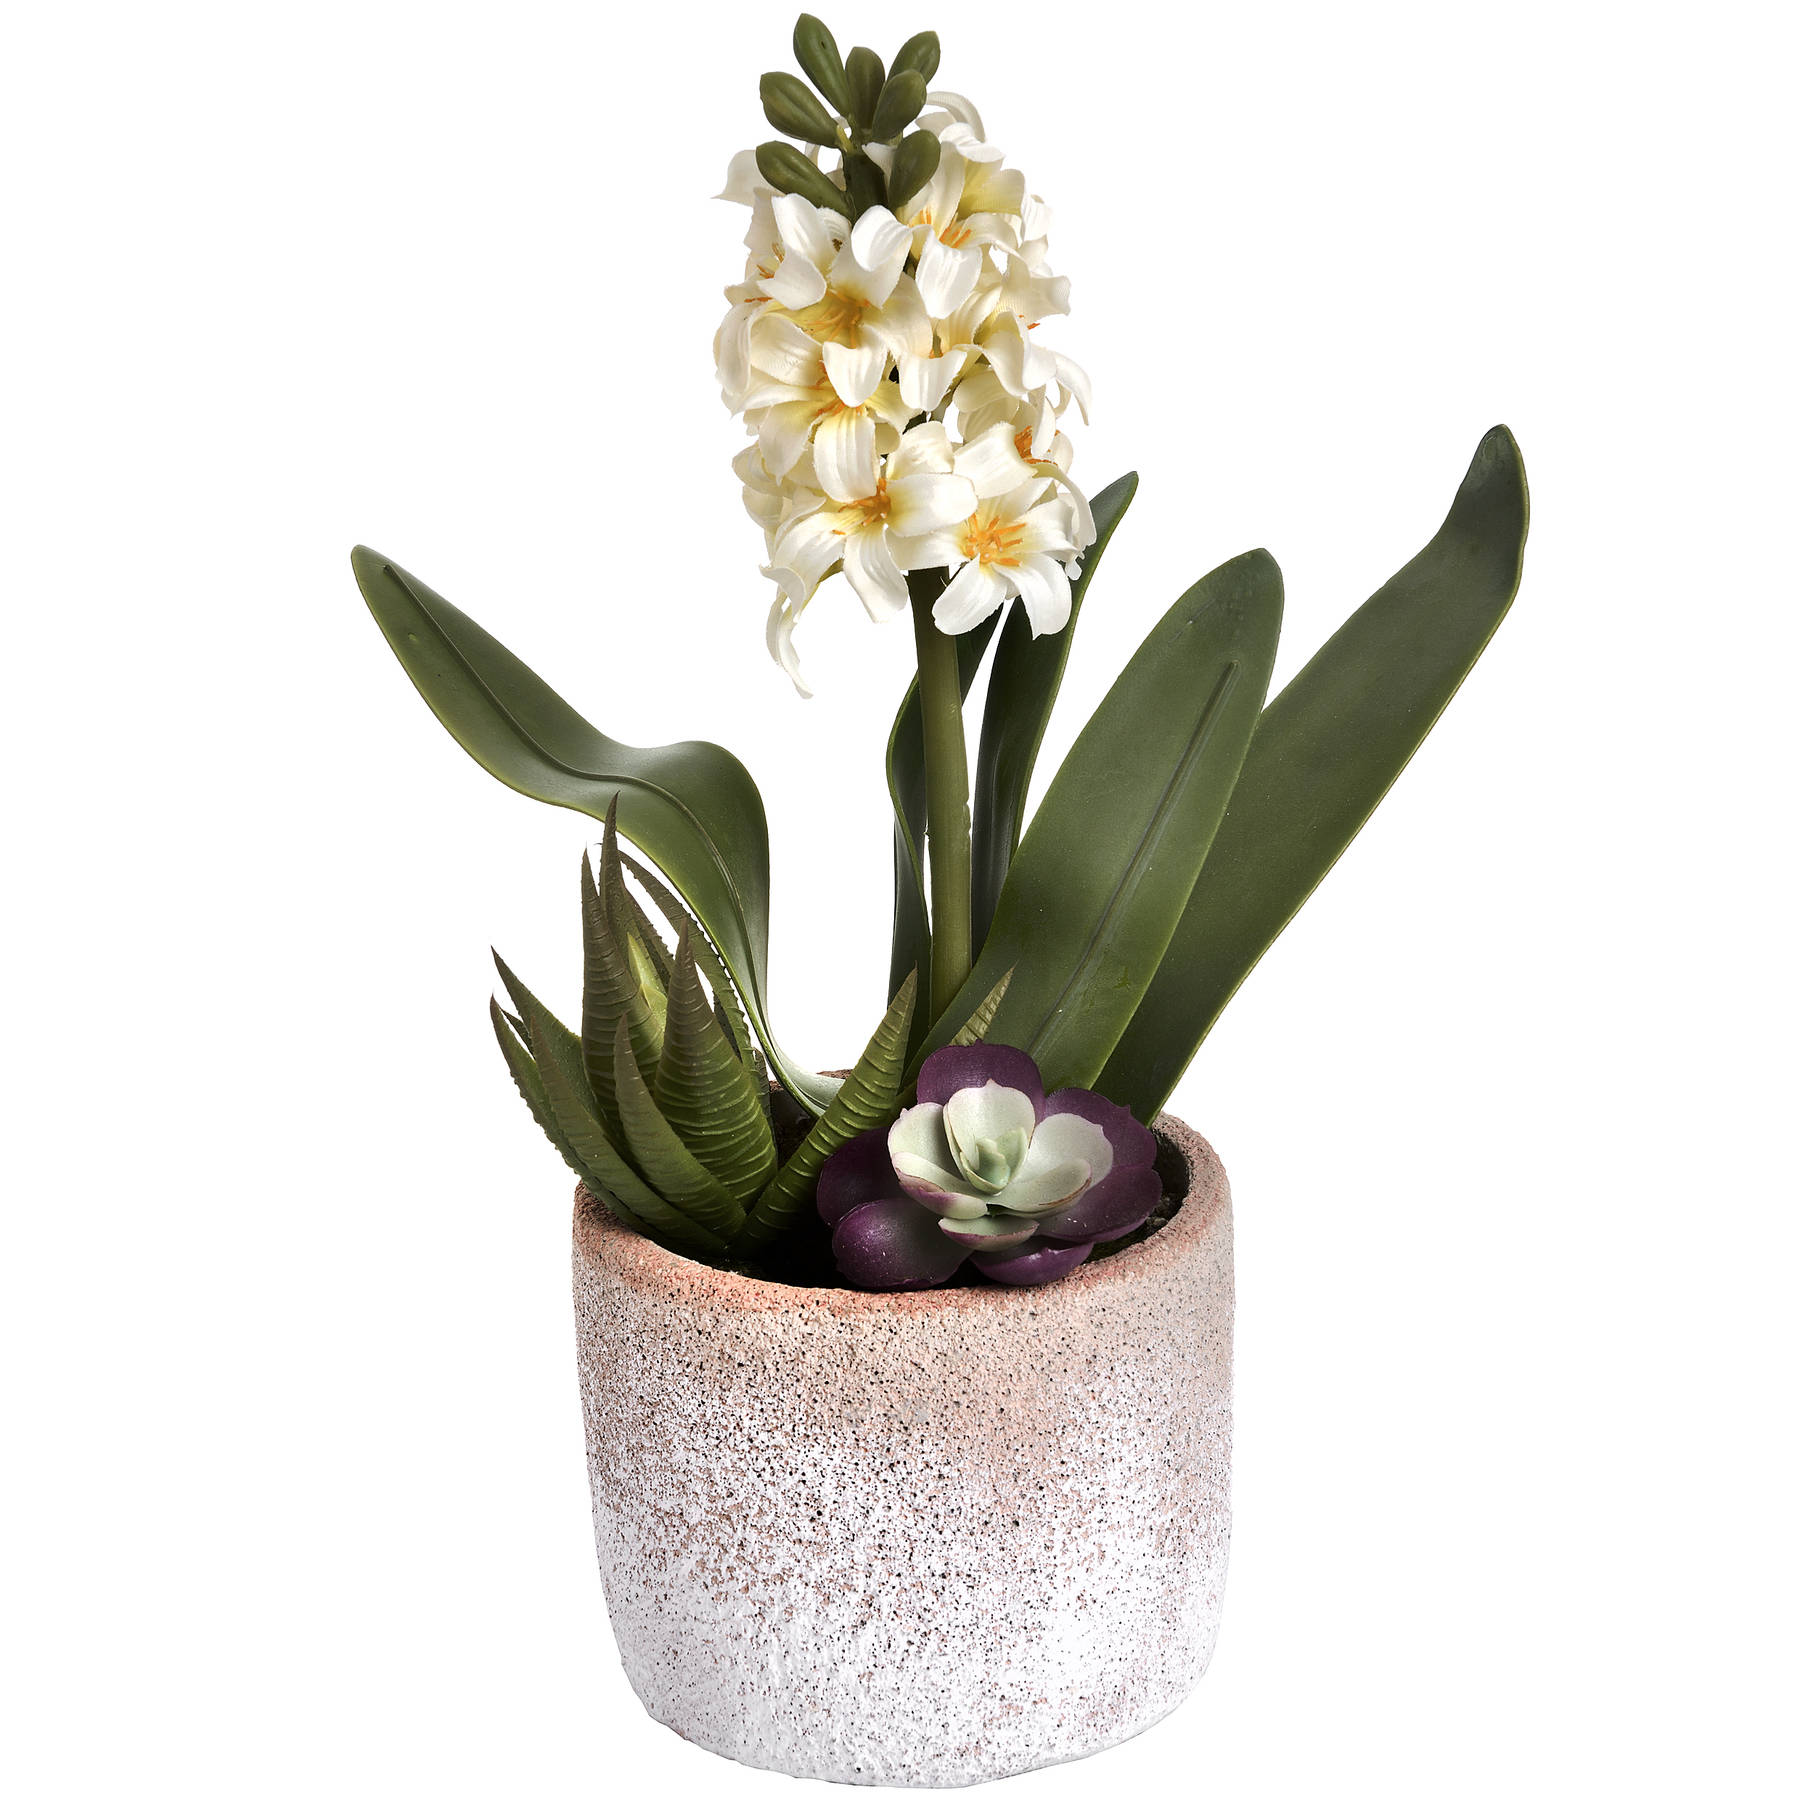 Potted White Hyacinth - Image 4